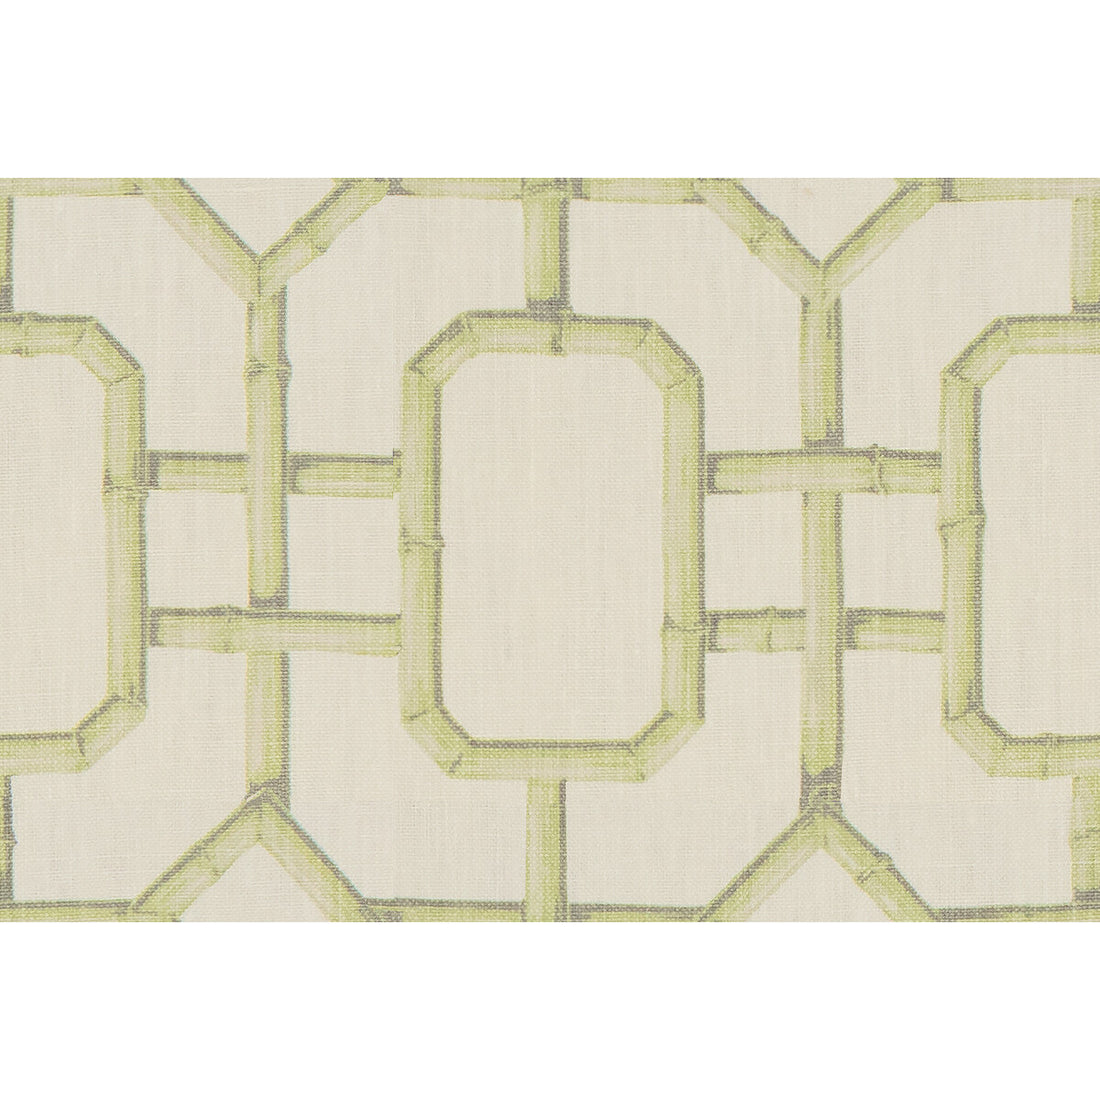 Bambu Fret fabric in celery color - pattern BAMBU FRET.23.0 - by Kravet Couture in the Jan Showers Glamorous collection